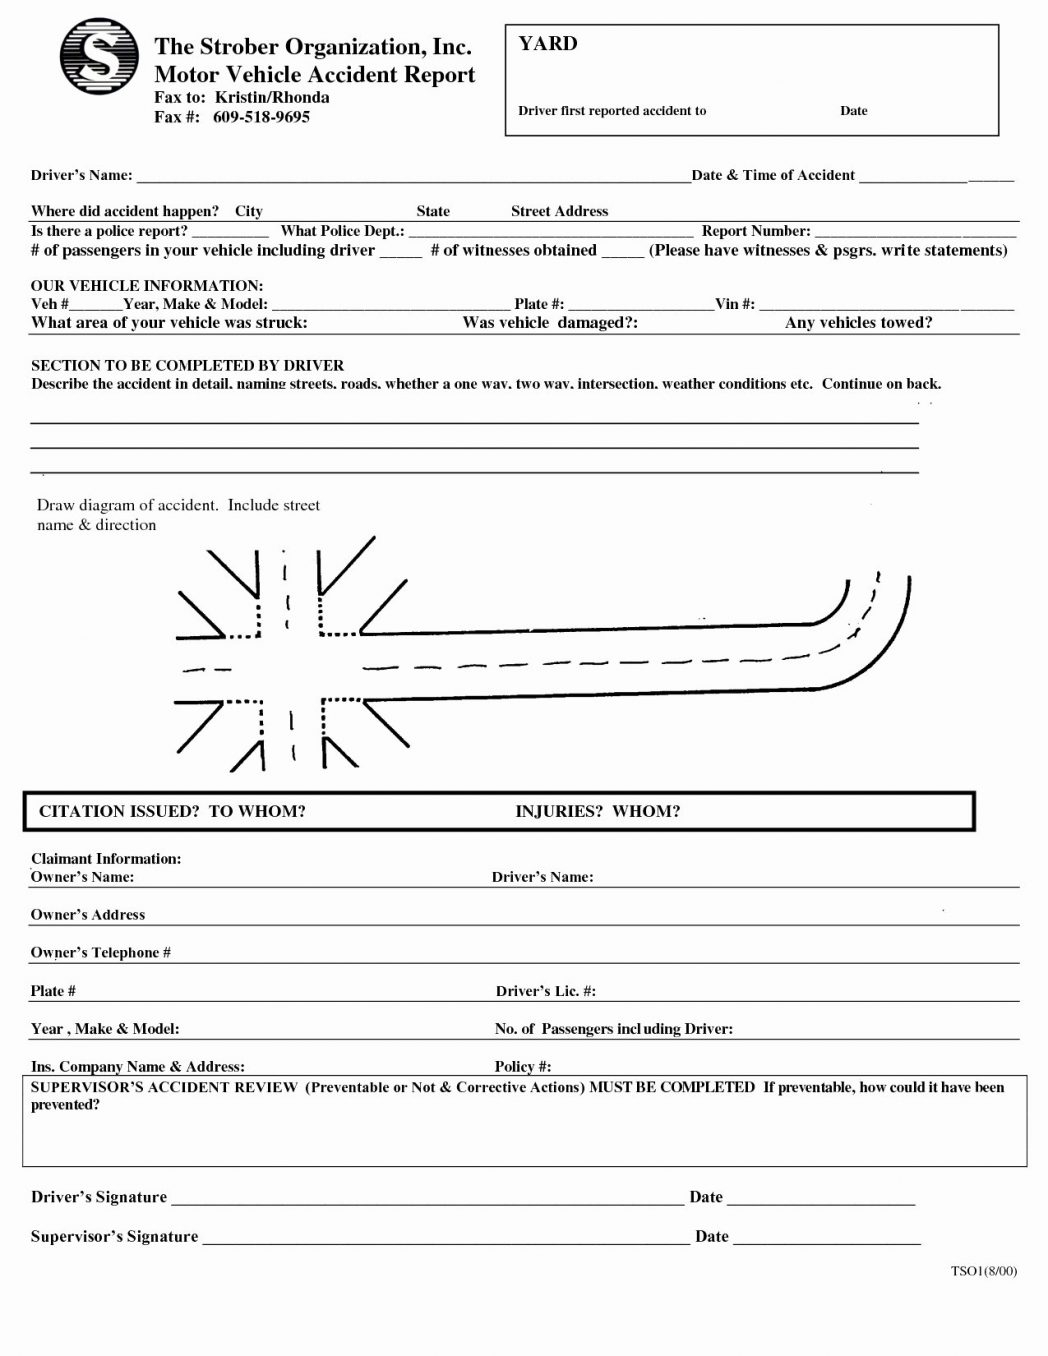 Accident Report Forms Template Awesome Incident Form Unique Inside Vehicle Accident Report Form Template